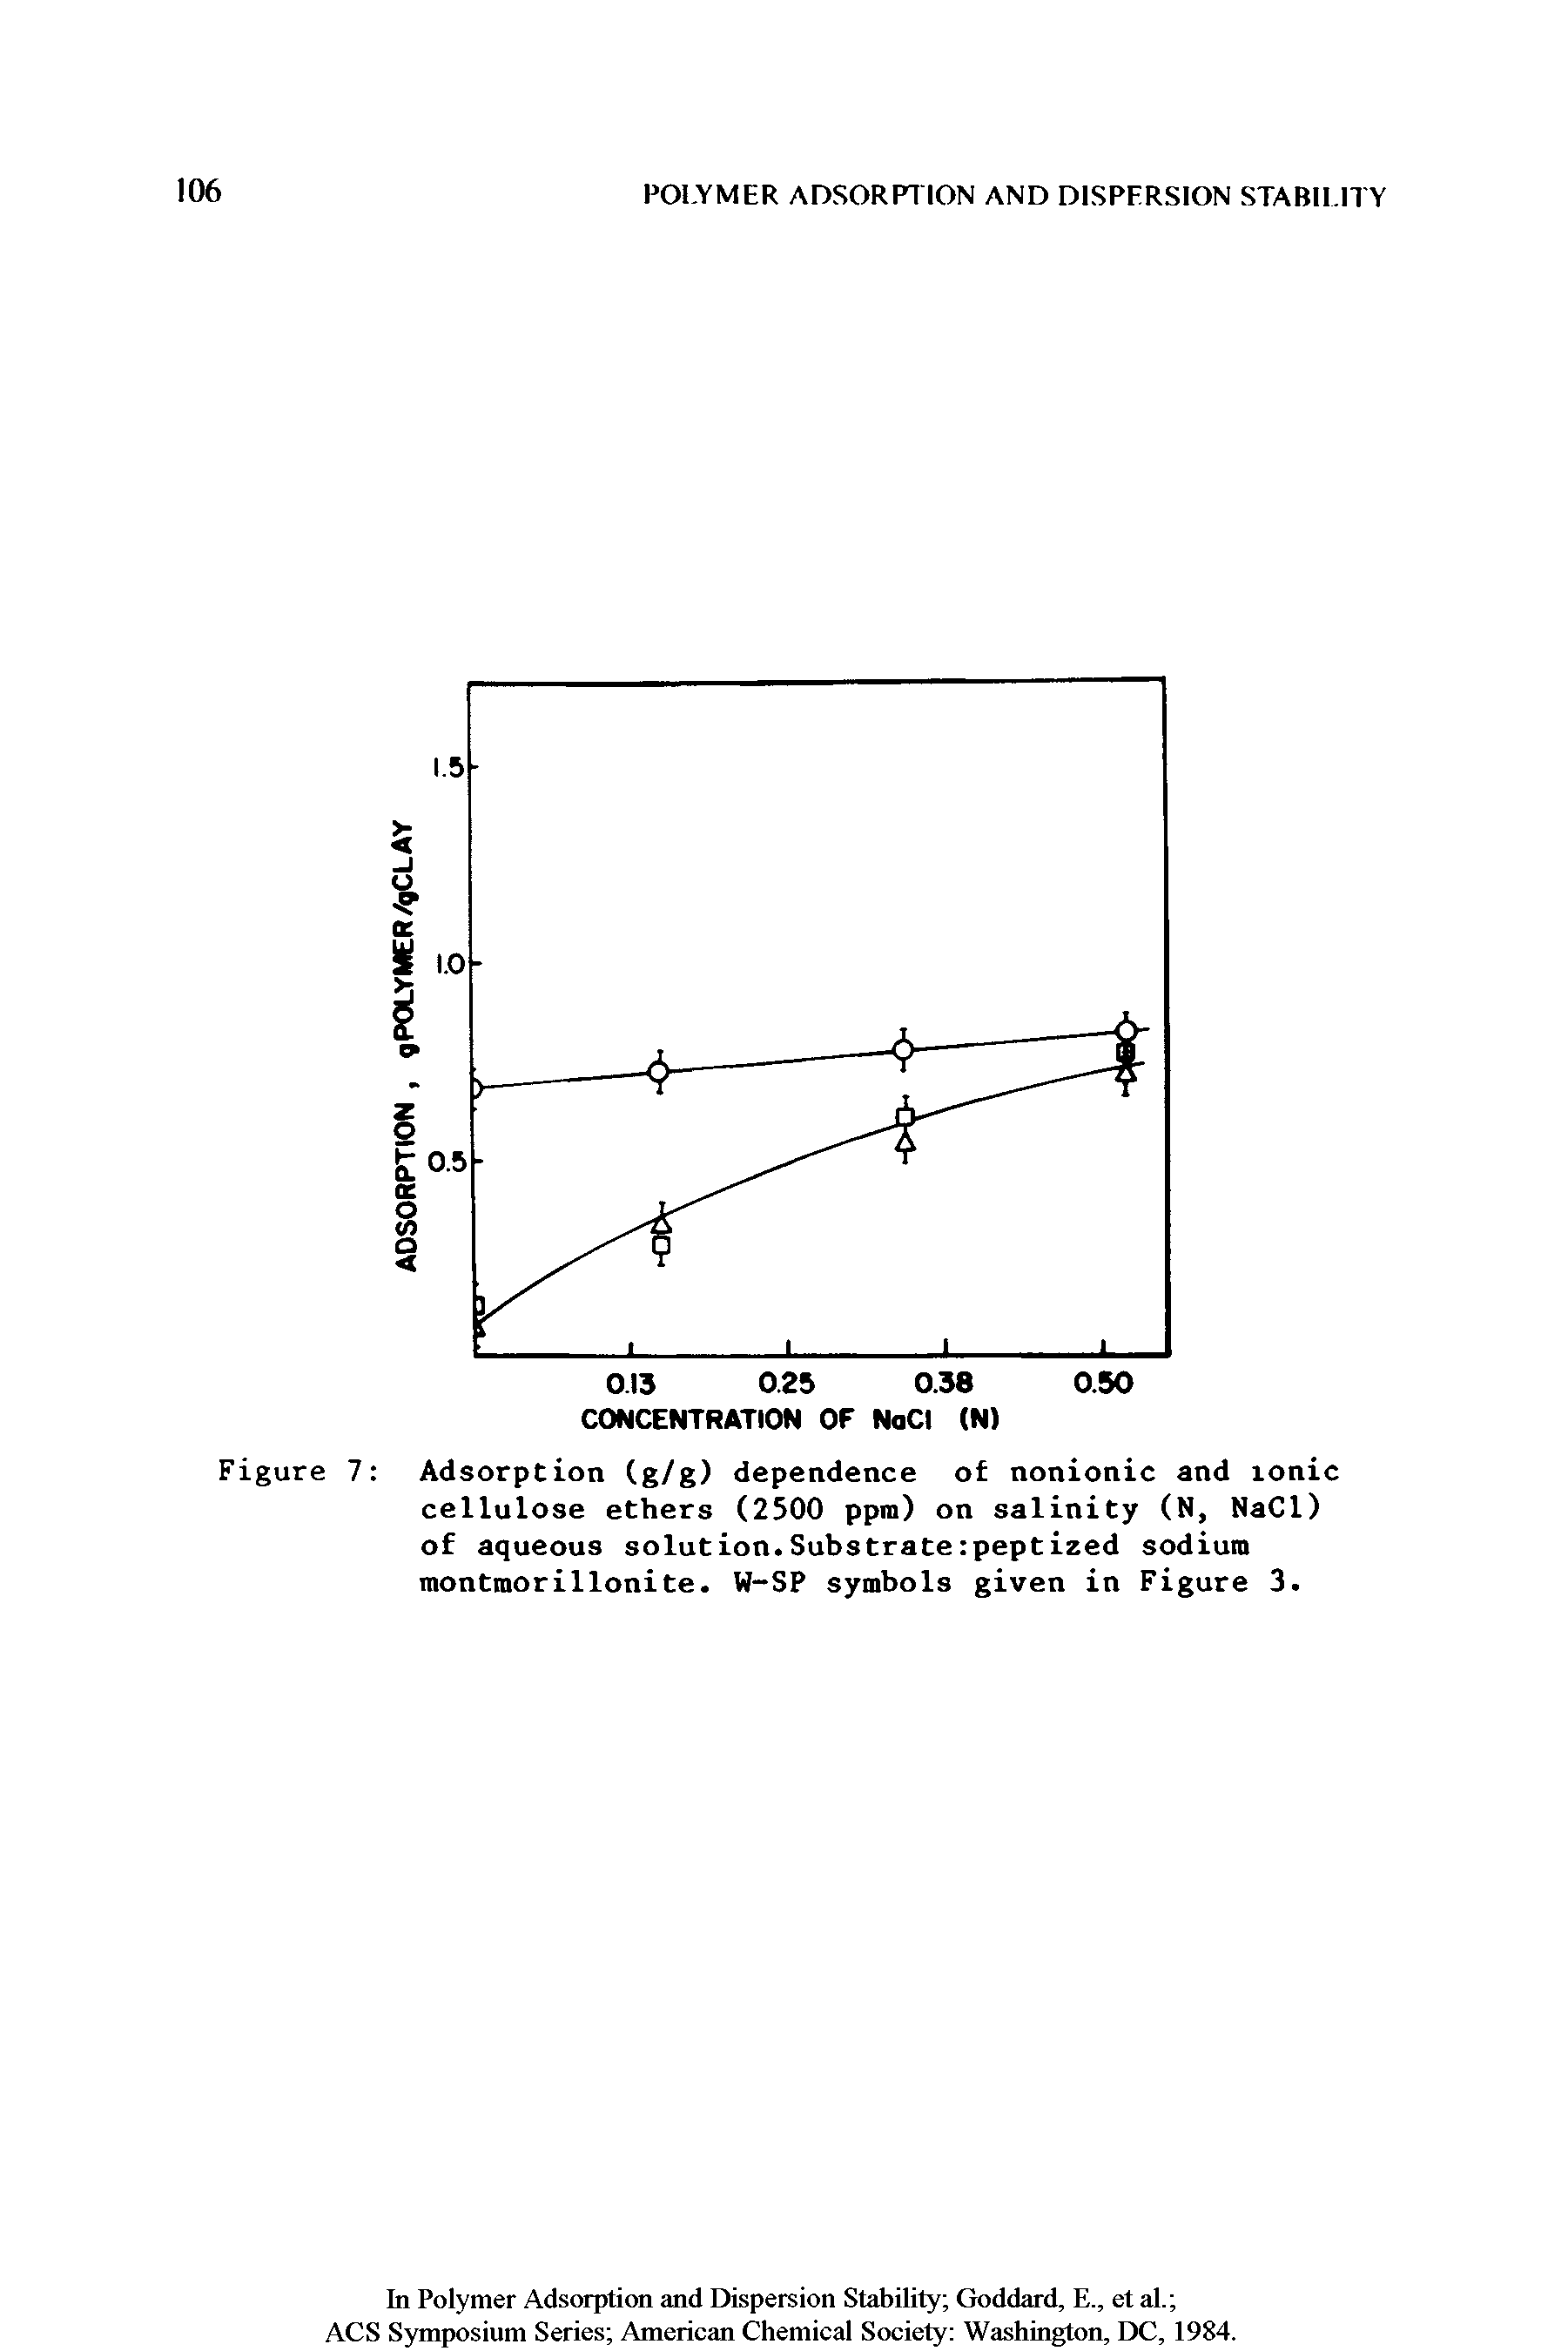 Figure 7 Adsorption (g/g) dependence of nonionic and ionic cellulose ethers (2500 ppm) on salinity (N, NaCI) of aqueous solution.Substrate peptized sodium montmorillonite. W-SP symbols given in Figure 3.